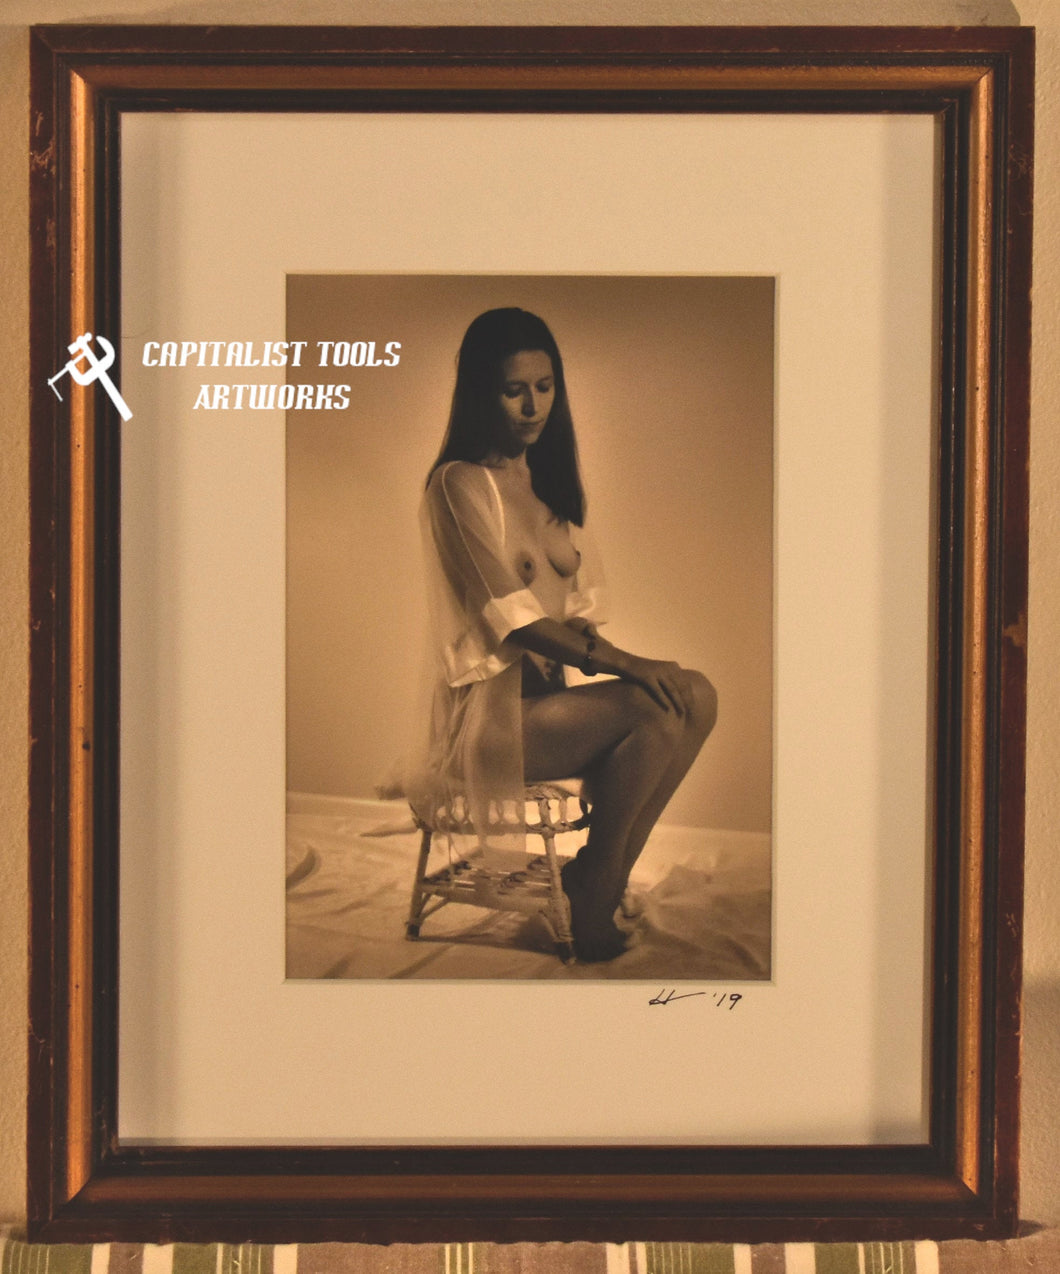 Dianea Seated - 5x7 sepia print in 8x10 frame of young woman in sheer robe seated on antique wicker footstool